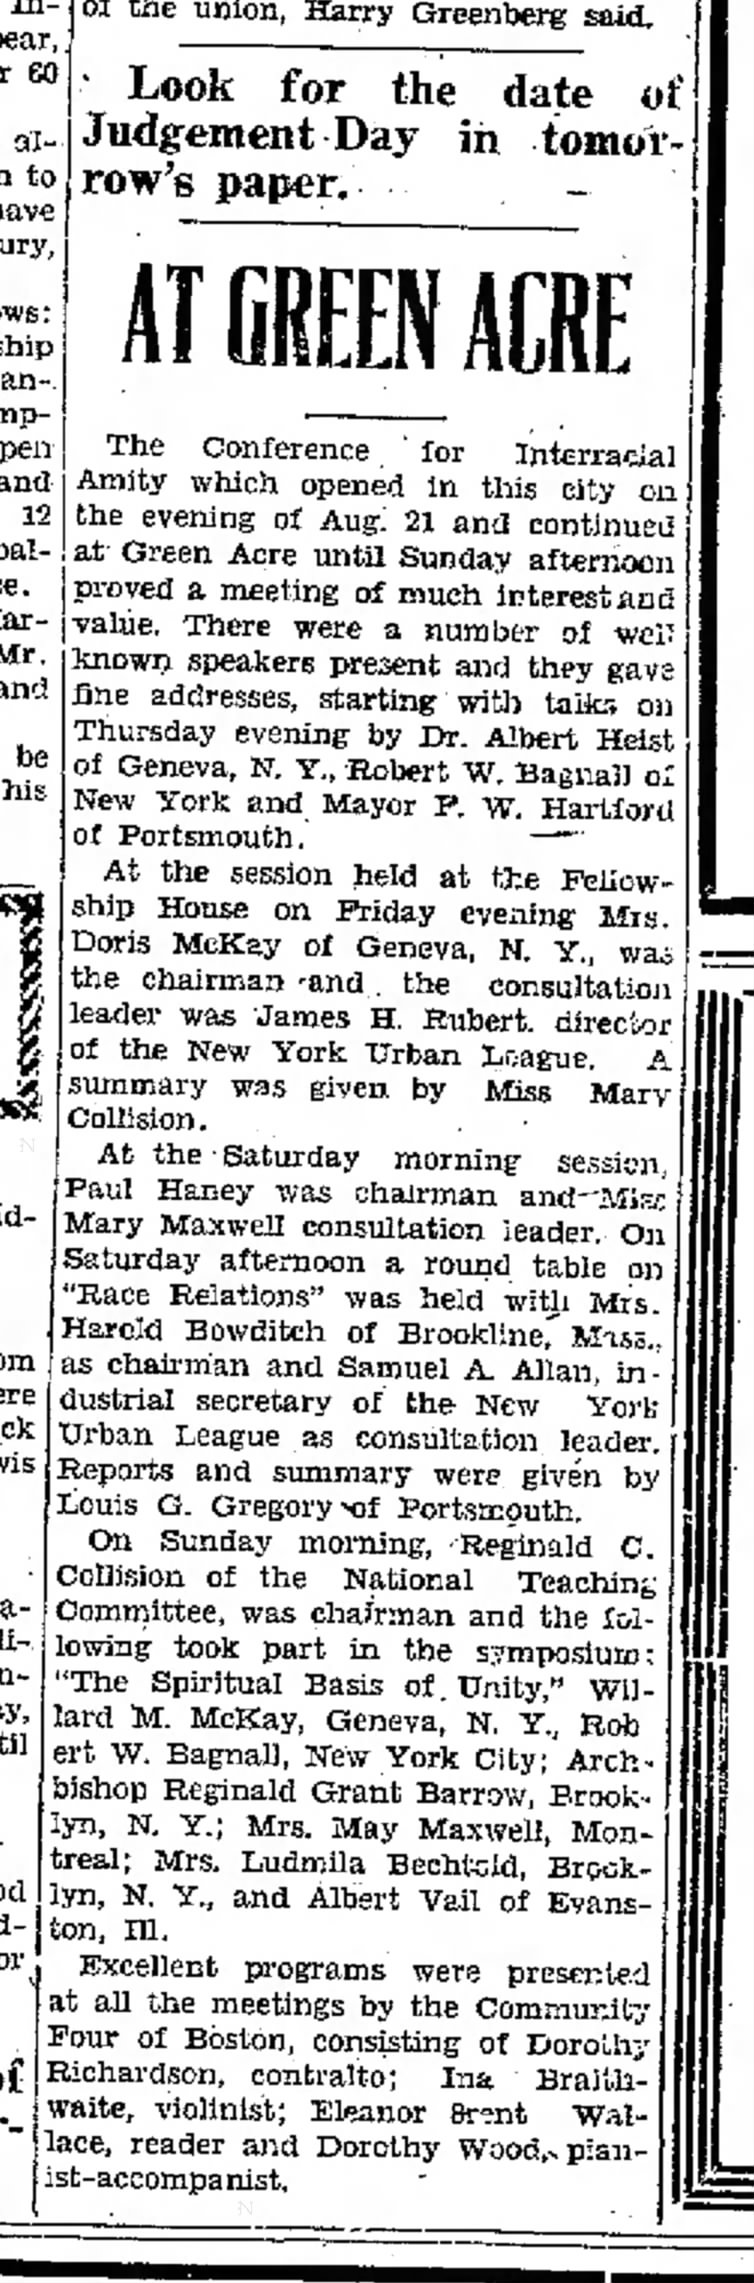 1930 Aug 26 Paul Haney and Mary Maxwell lead Race Relations Discussion at Green Acre